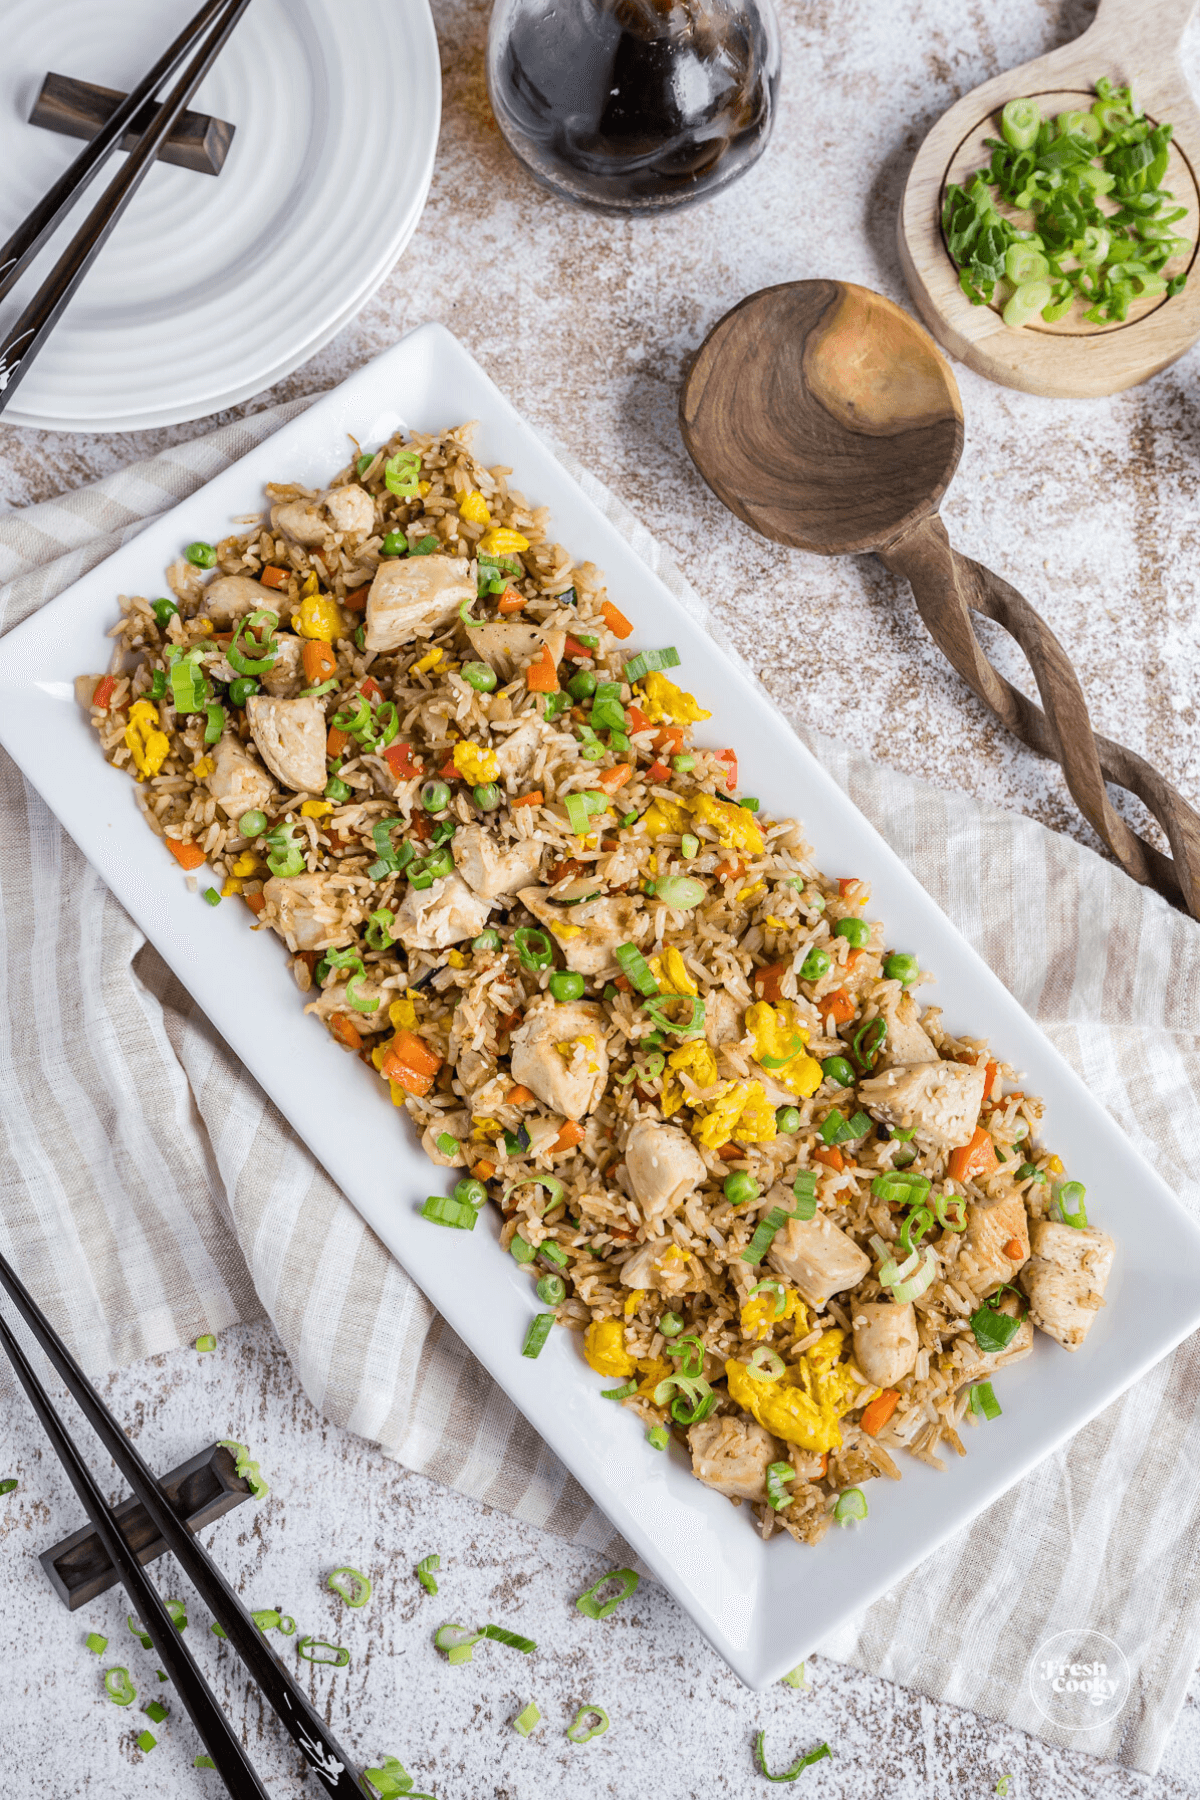 Best Blackstone Chicken Fried Rice Recipe in pretty rectangular dish with wooden spoon and chopsticks nearby.